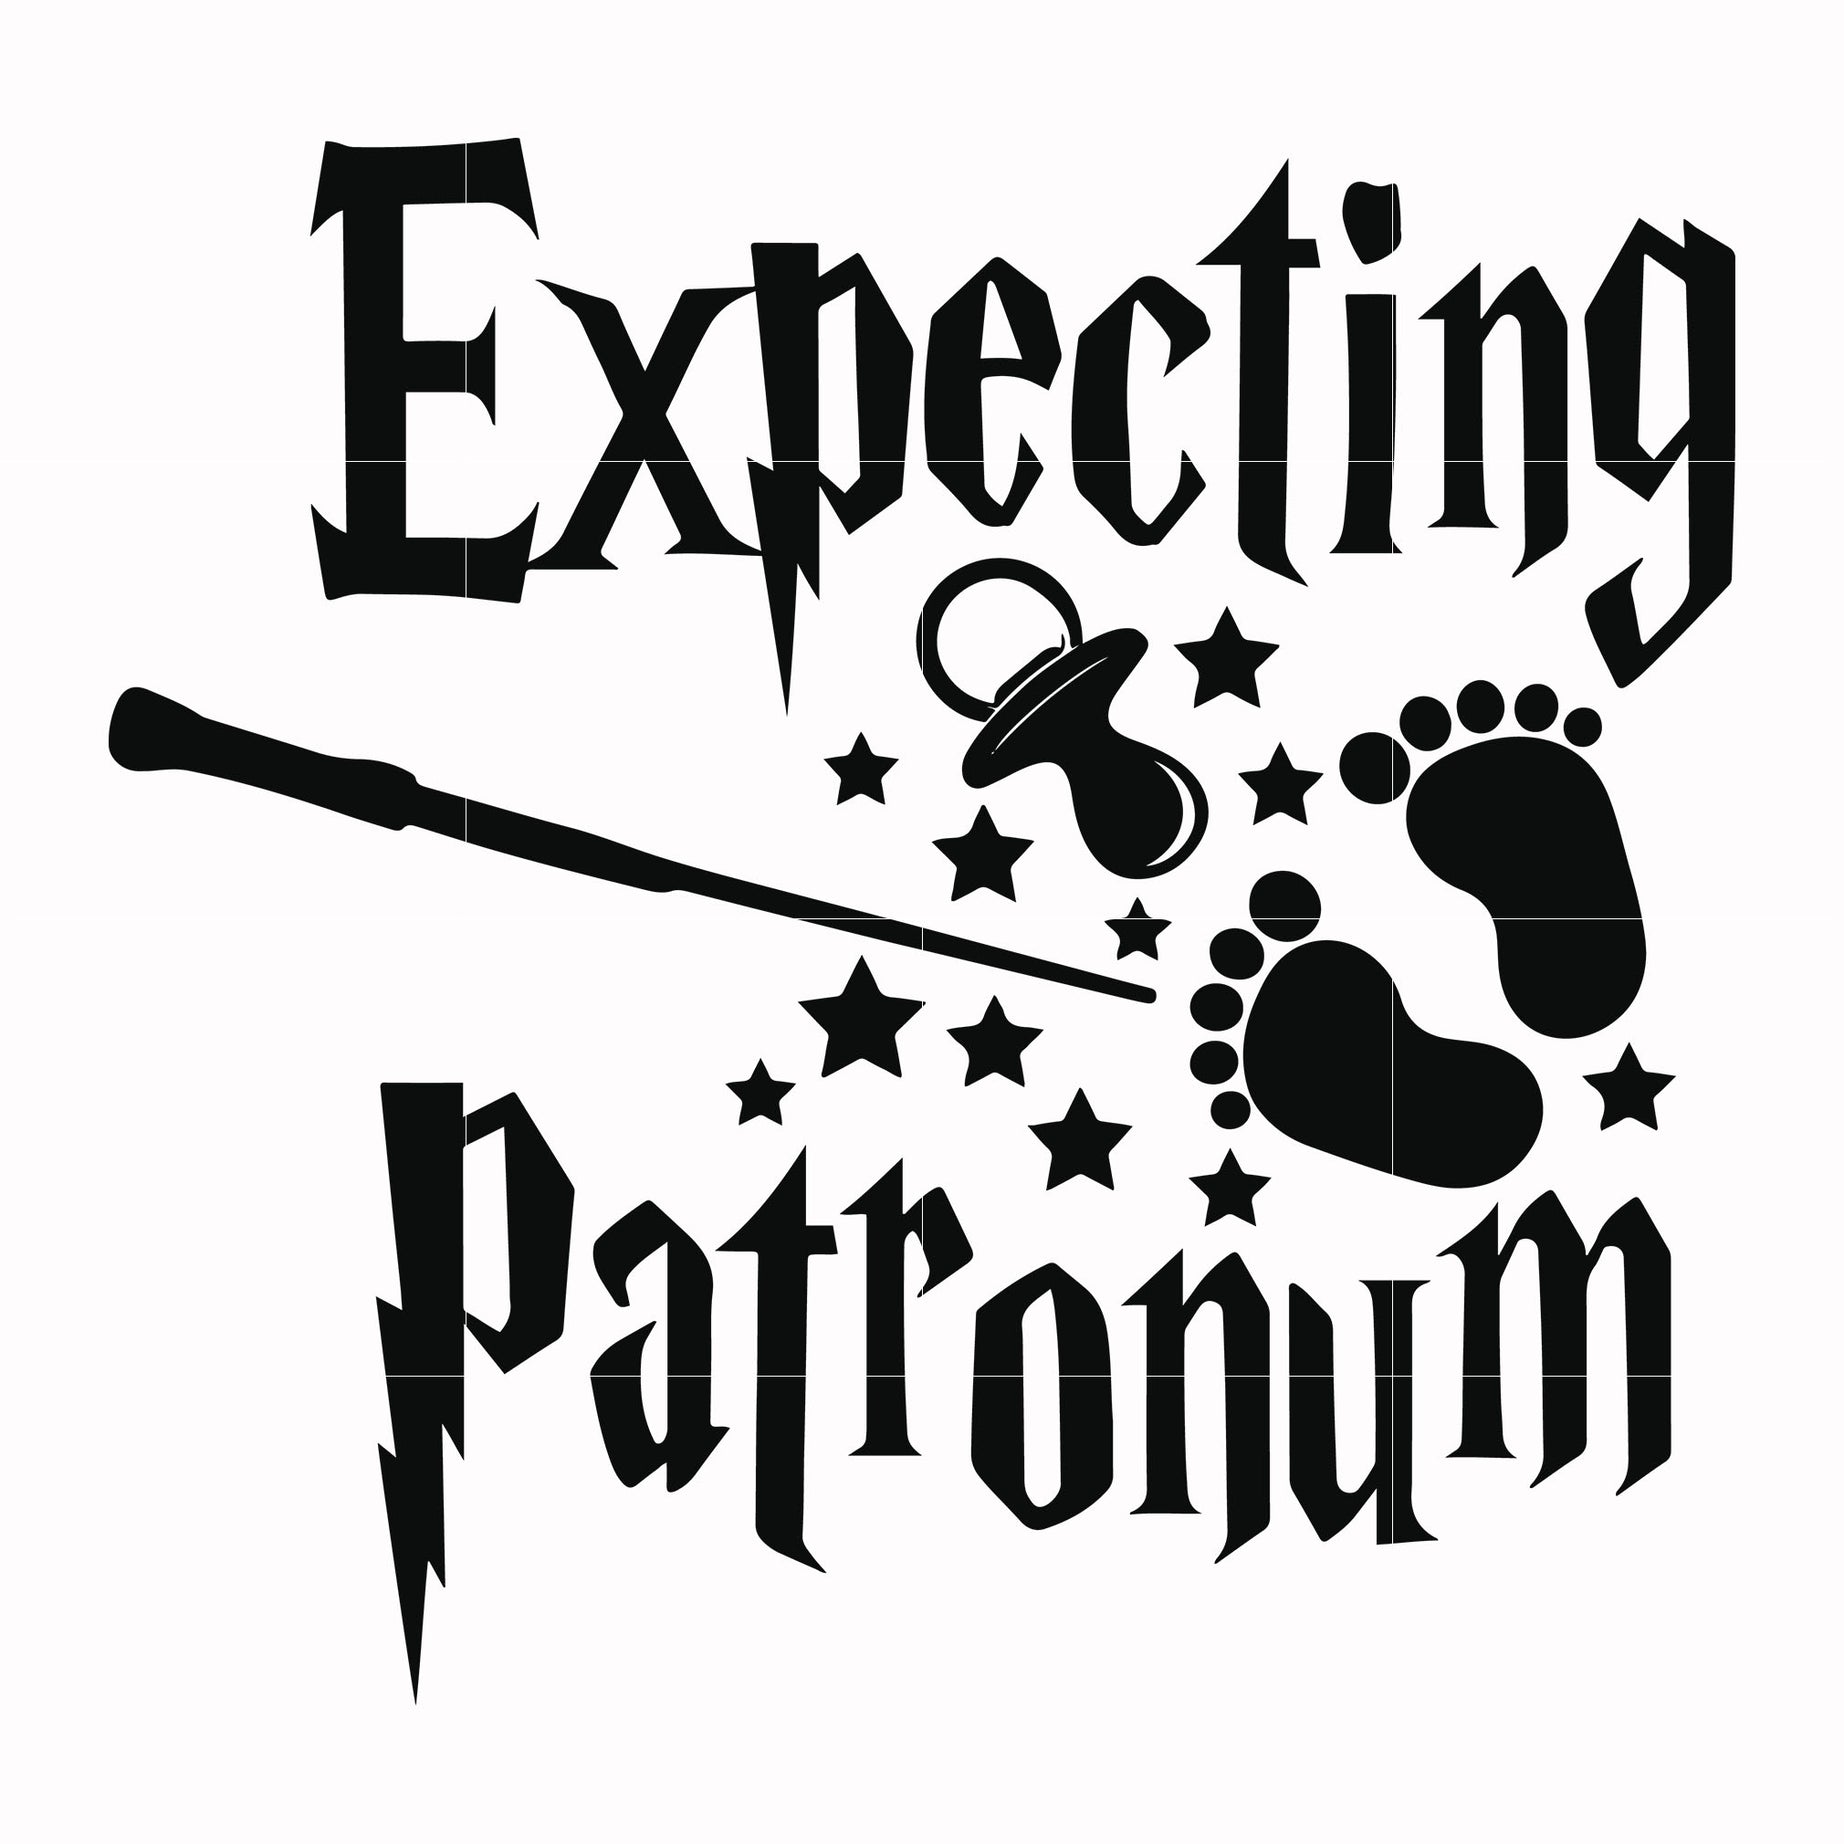 Expecting patronum svg, png, dxf, eps file HRPT00039